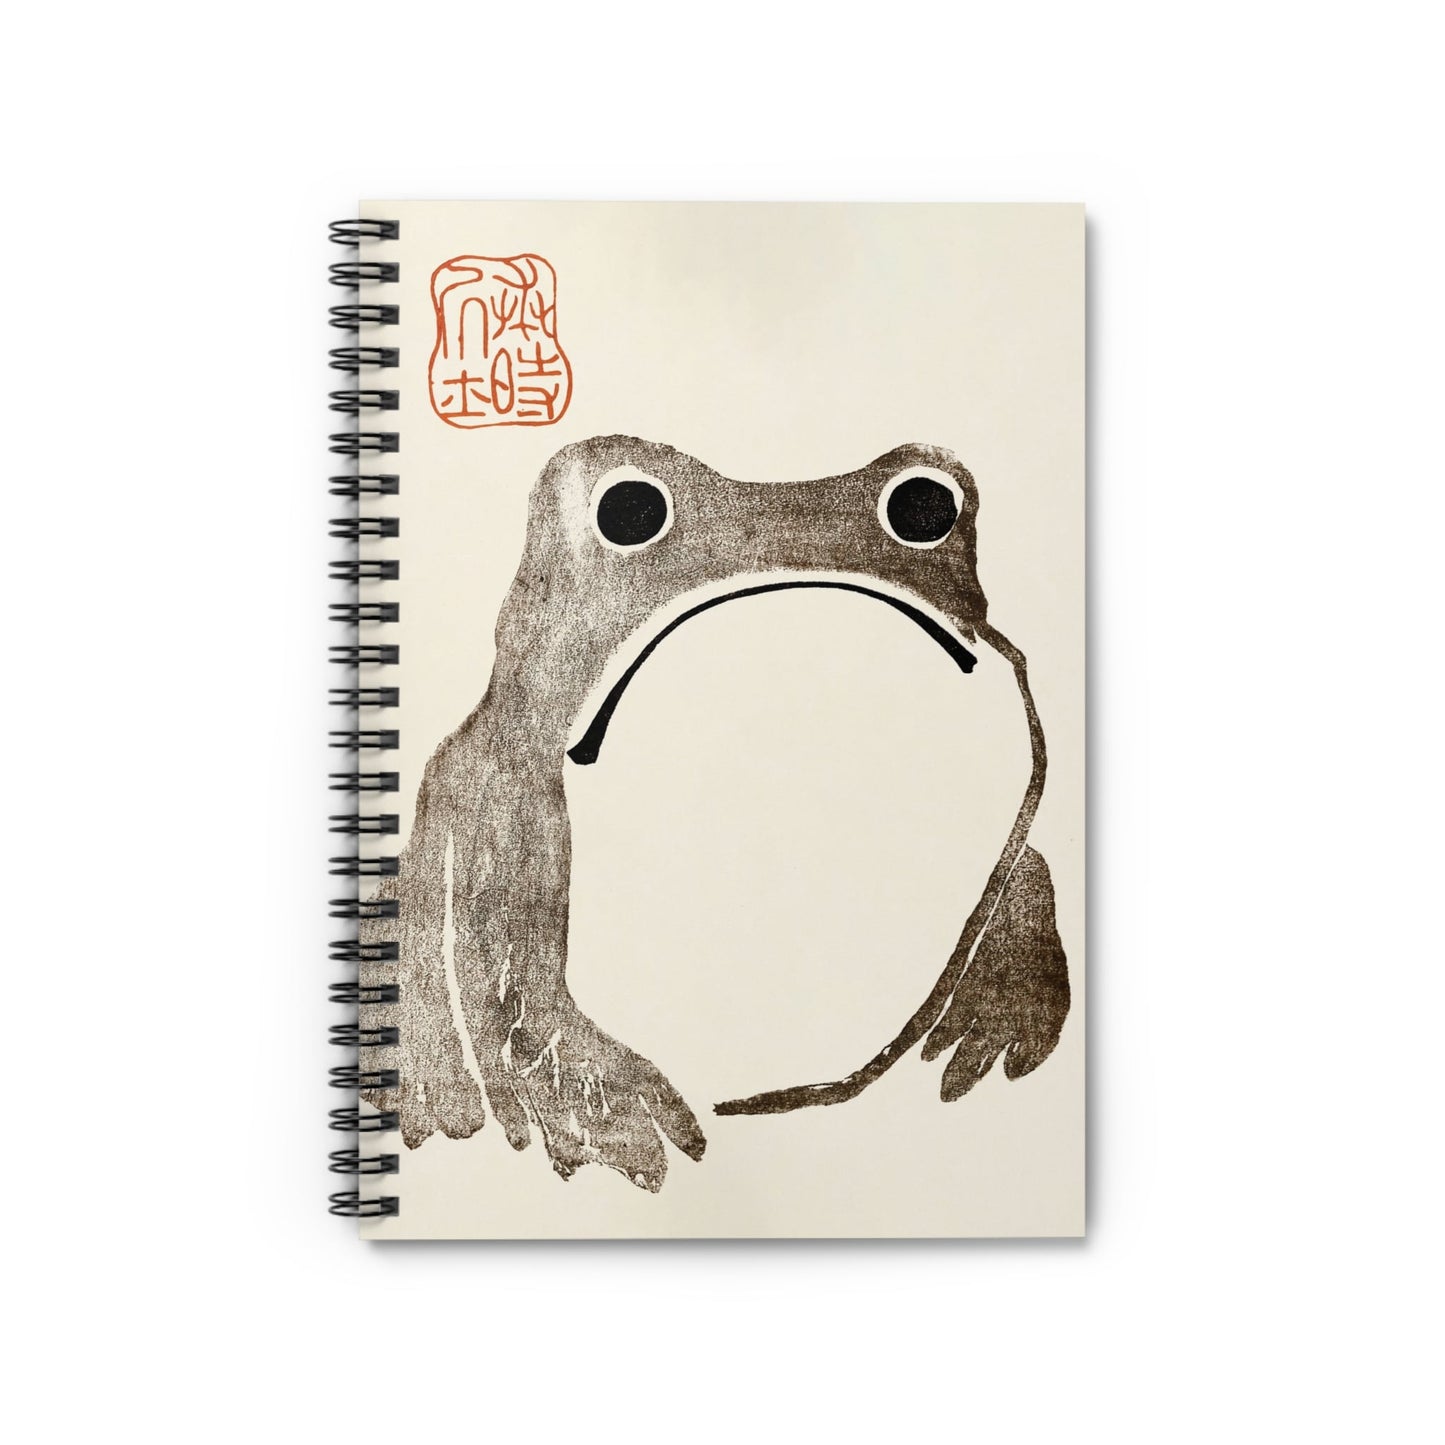 Grumpy Frog Notebook with sad frog cover, perfect for journaling and planning, featuring a humorous sad frog illustration.